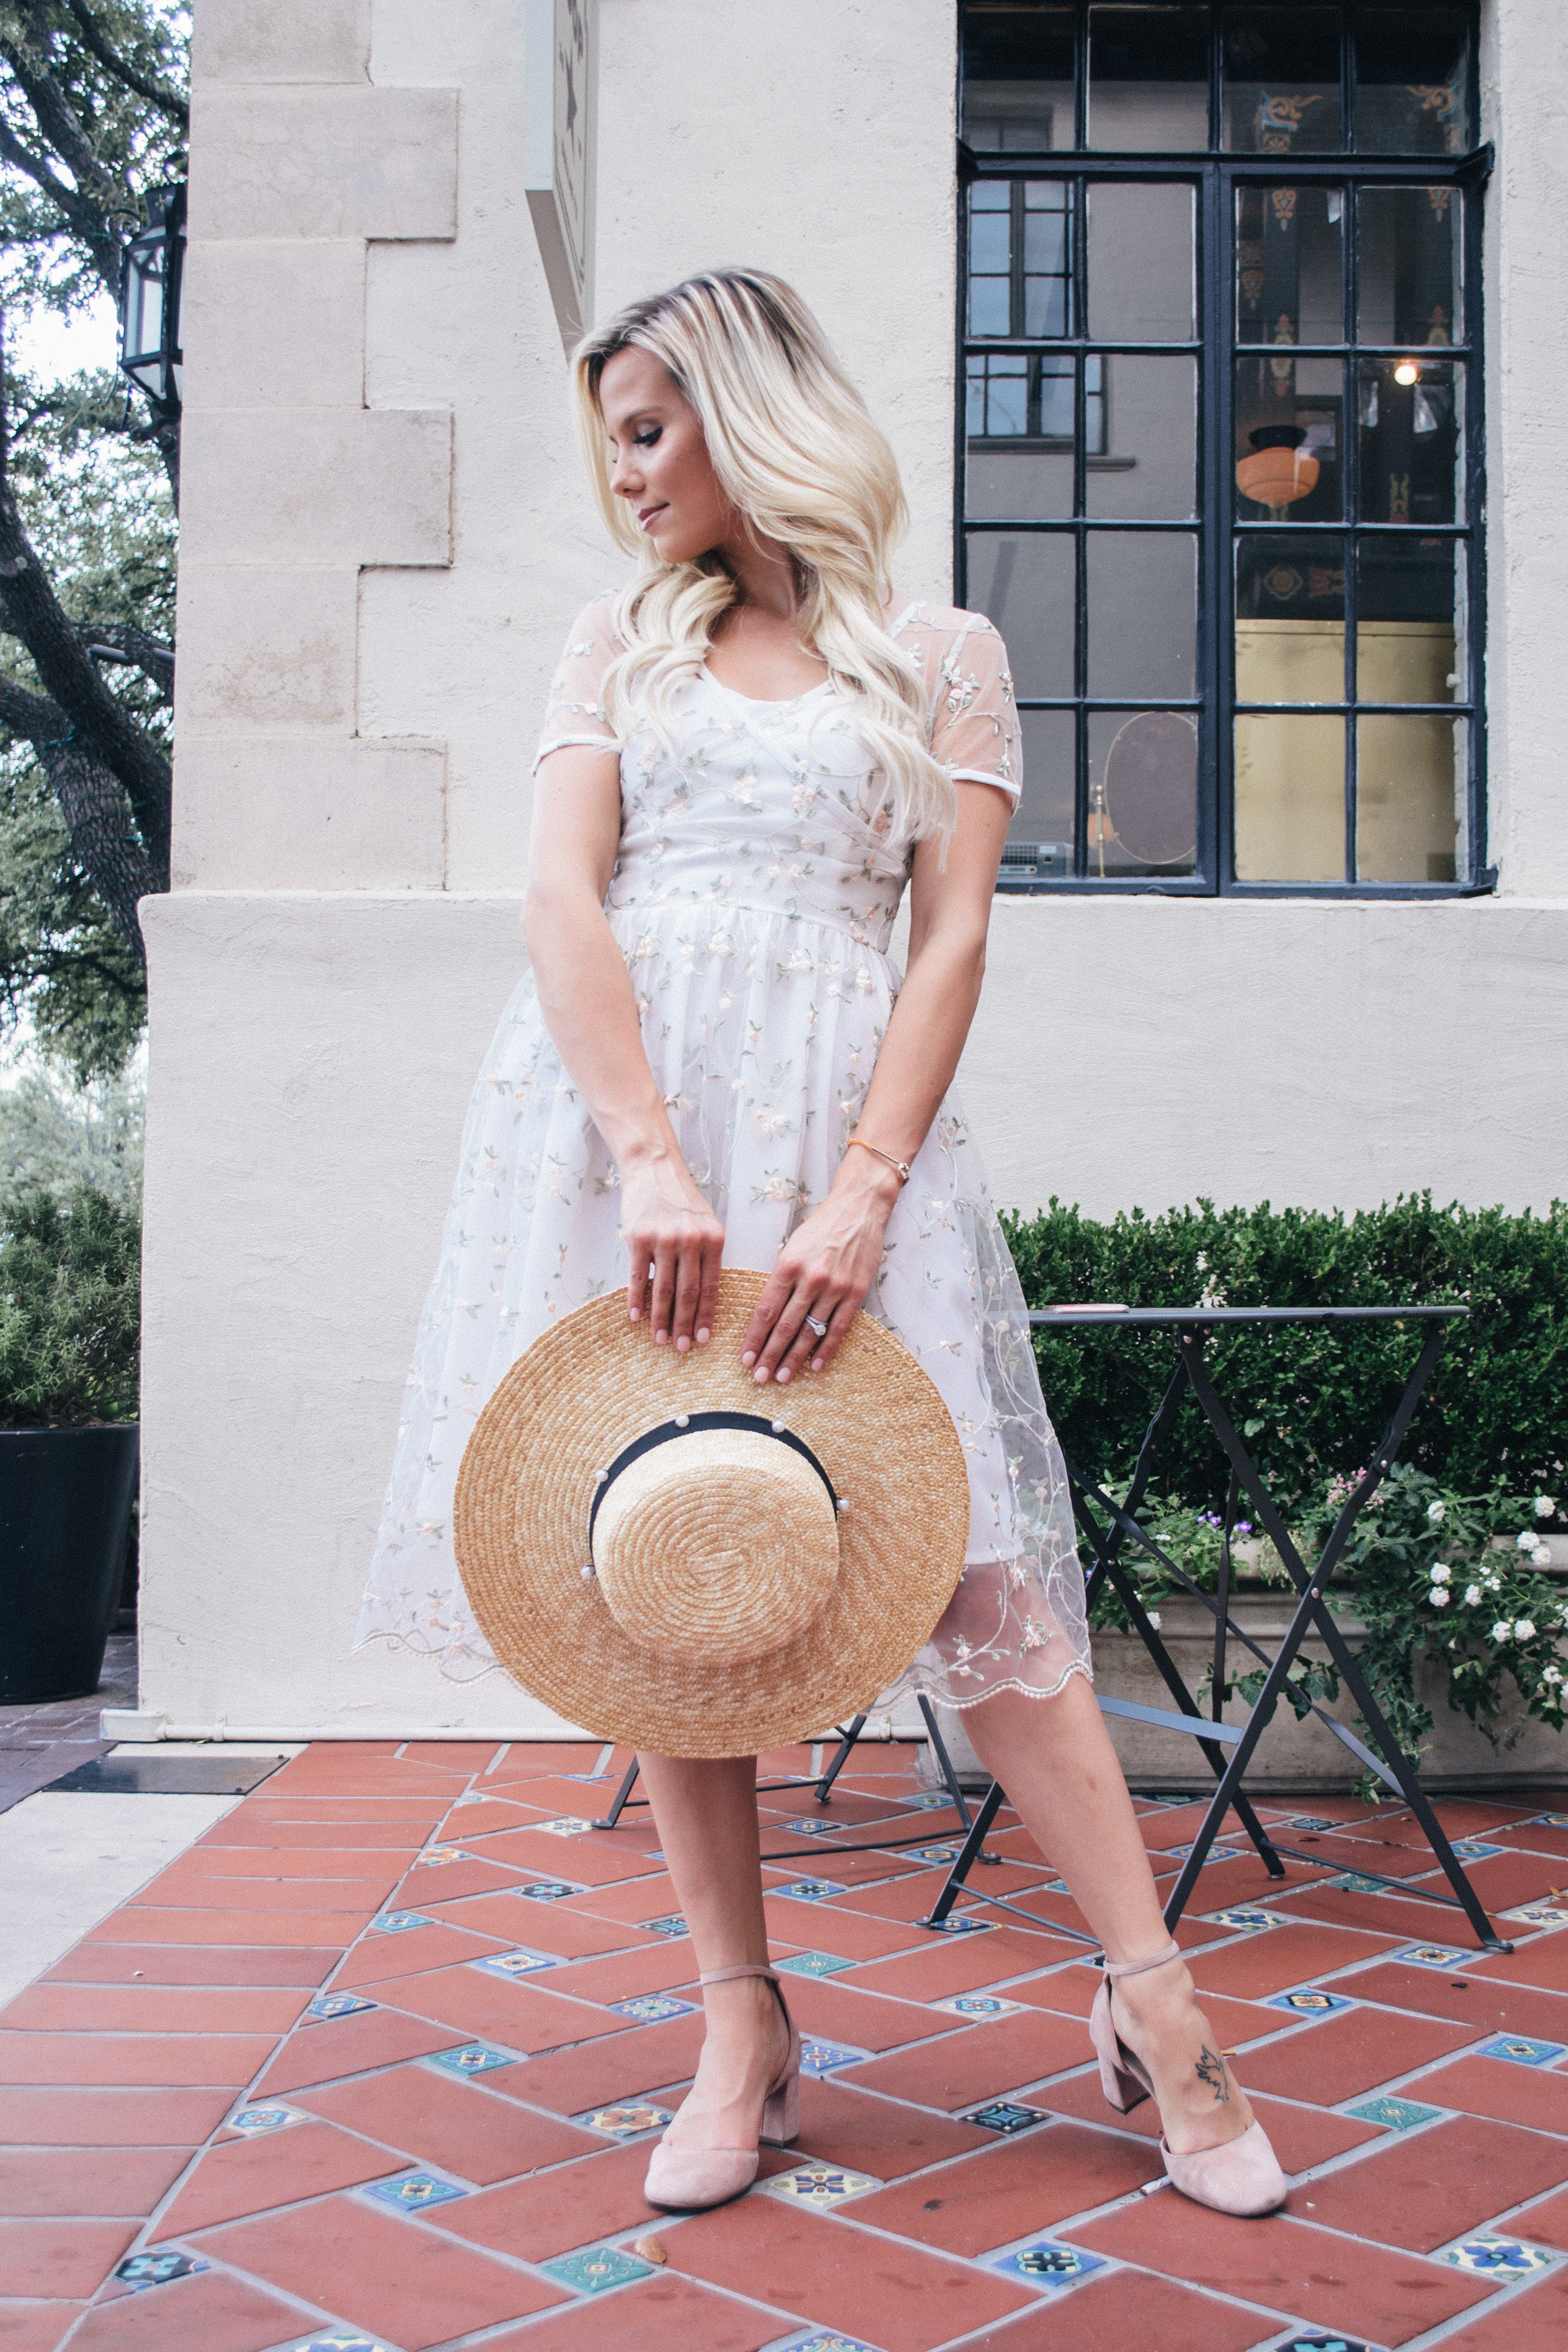 Look like a modern day Grace Kelly with this ivory a-line embroidered dress #1950style #gracekelly #gracekellystyle #modernmuse #vintagestyle |Hannah McDonnell of Glam Life Living a Dallas blonde|